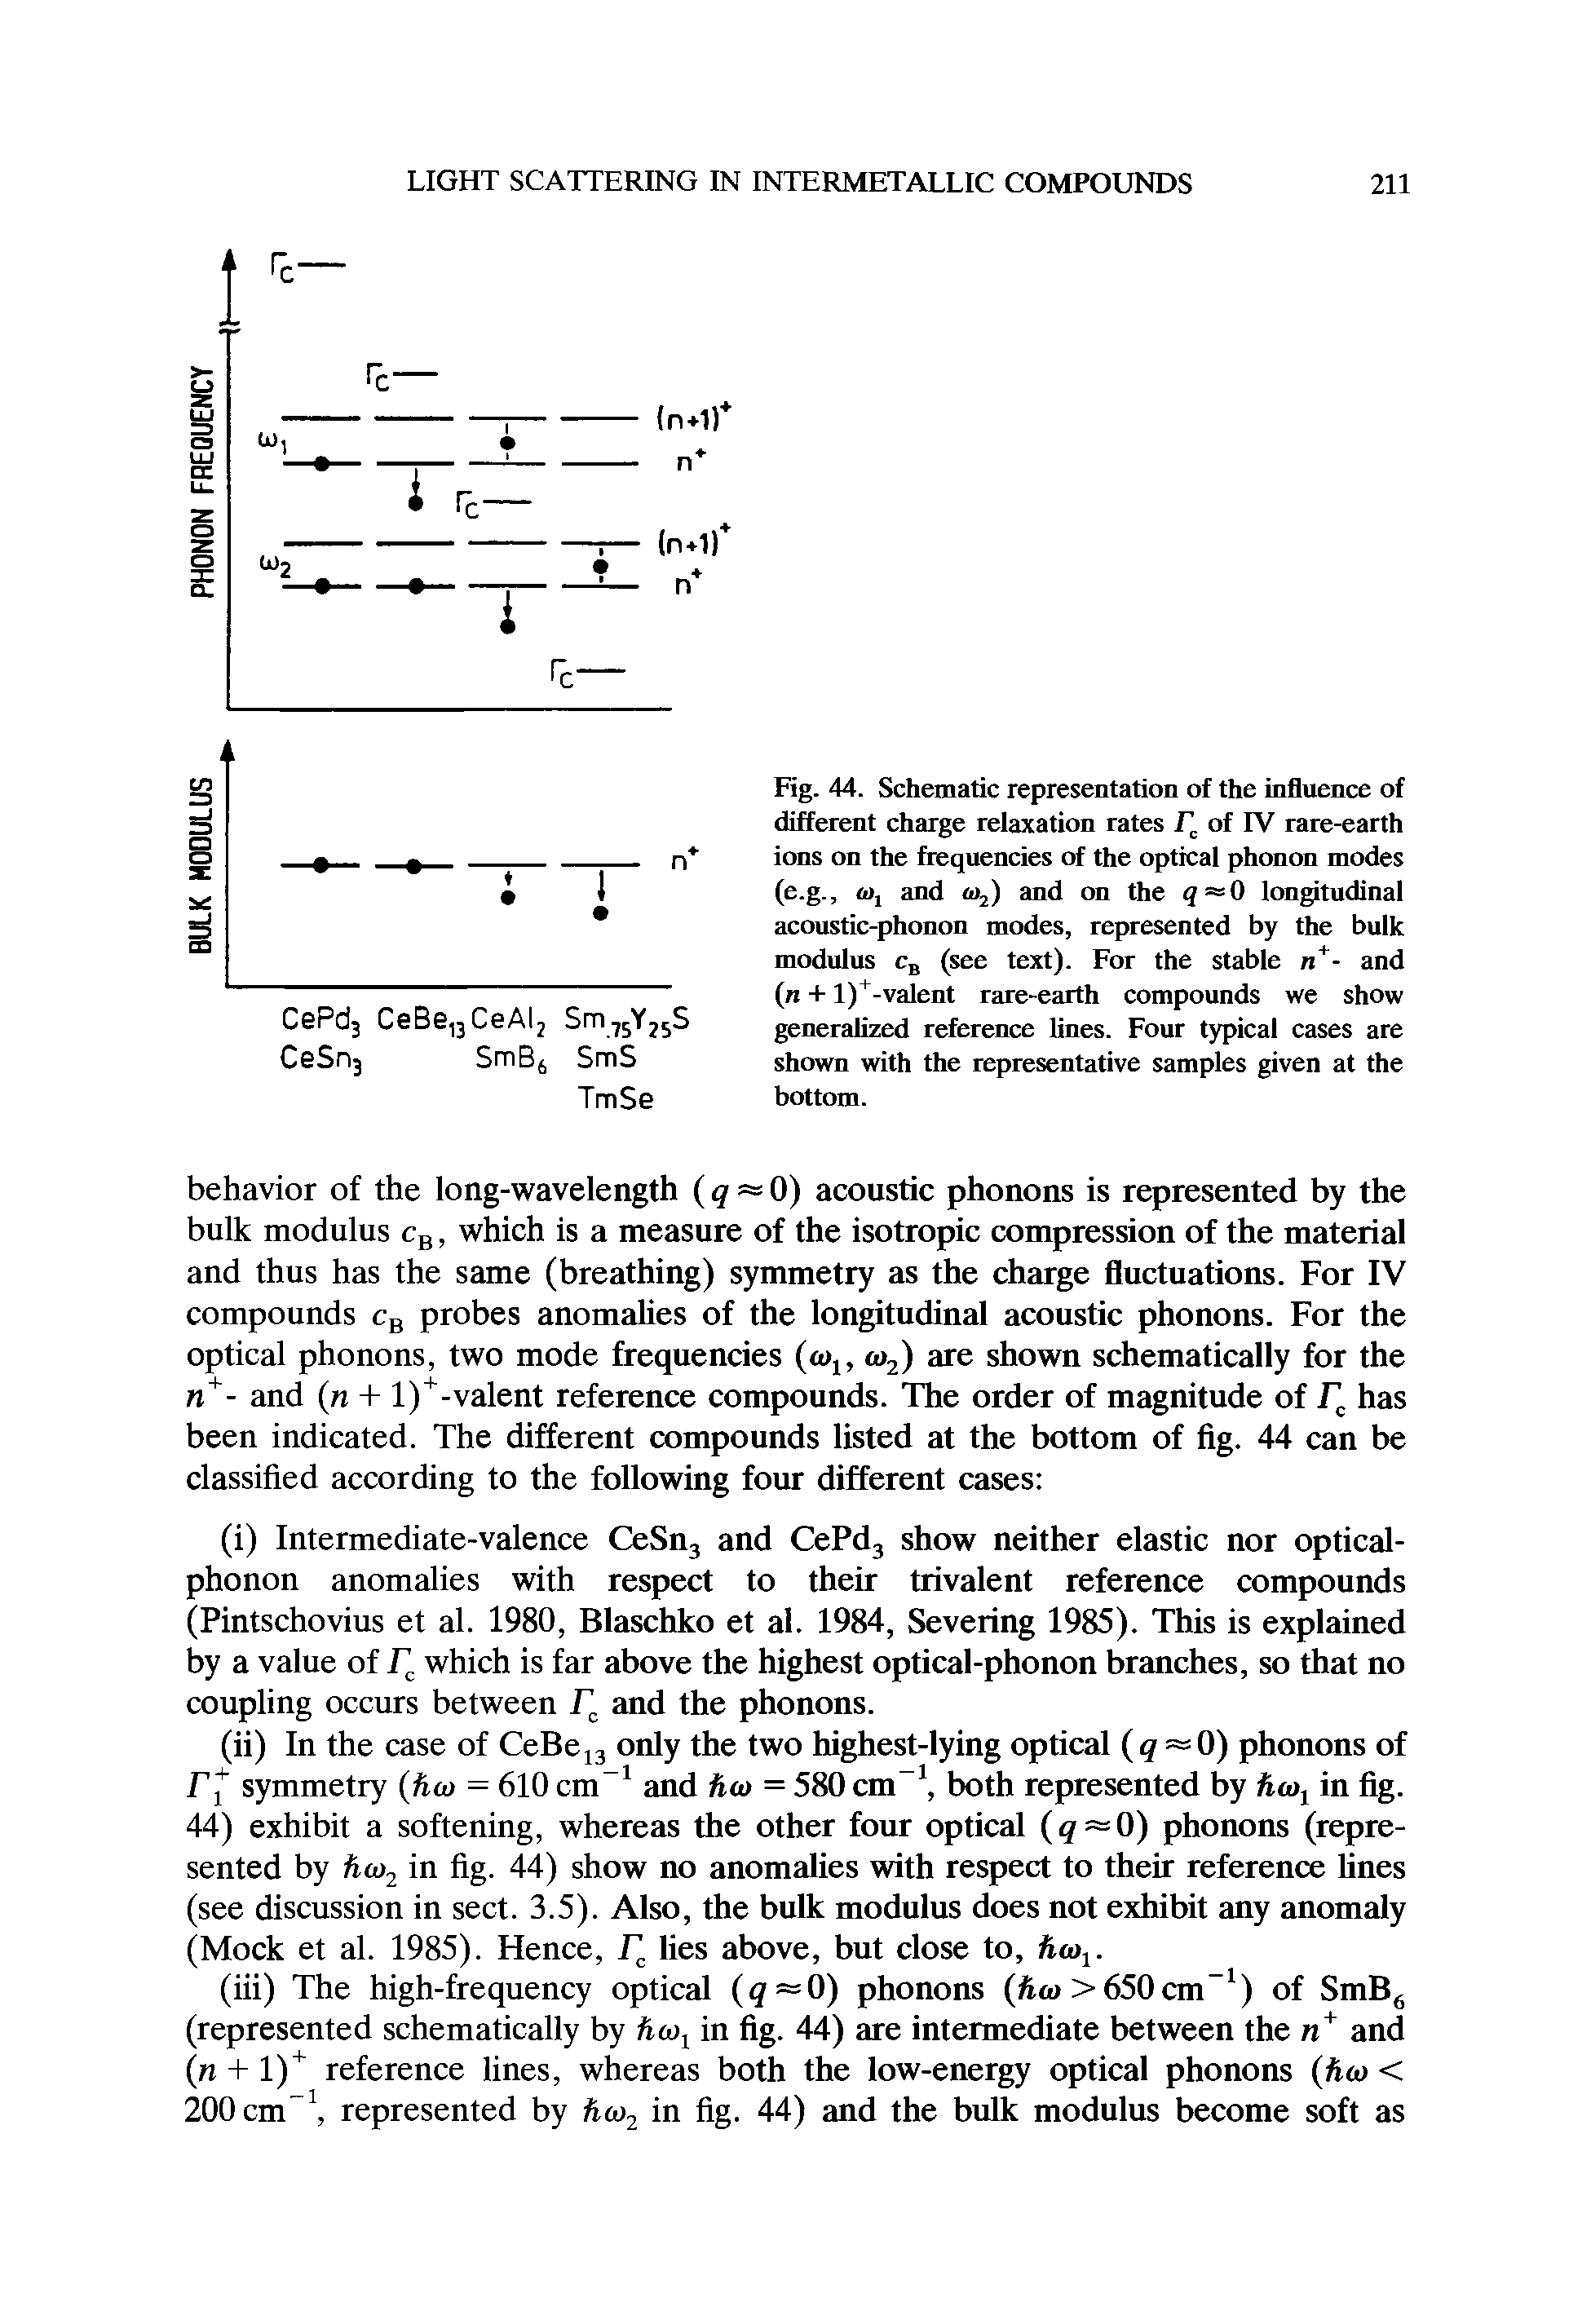 Fig. 44. Schematic representation of the influence of different charge relaxation rates of IV rare-earth ions on the frequencies of the optical phonon modes (e.g., (dj and at ) and on the q=0 longitudinal acoustic-phonon modes, represented by the bulk modulus Cg (see text). For the stable n - and (n -1- l) -valent rare-earth compounds we show generalized reference lines. Four typical cases are shown with the representative samples given at the bottom.